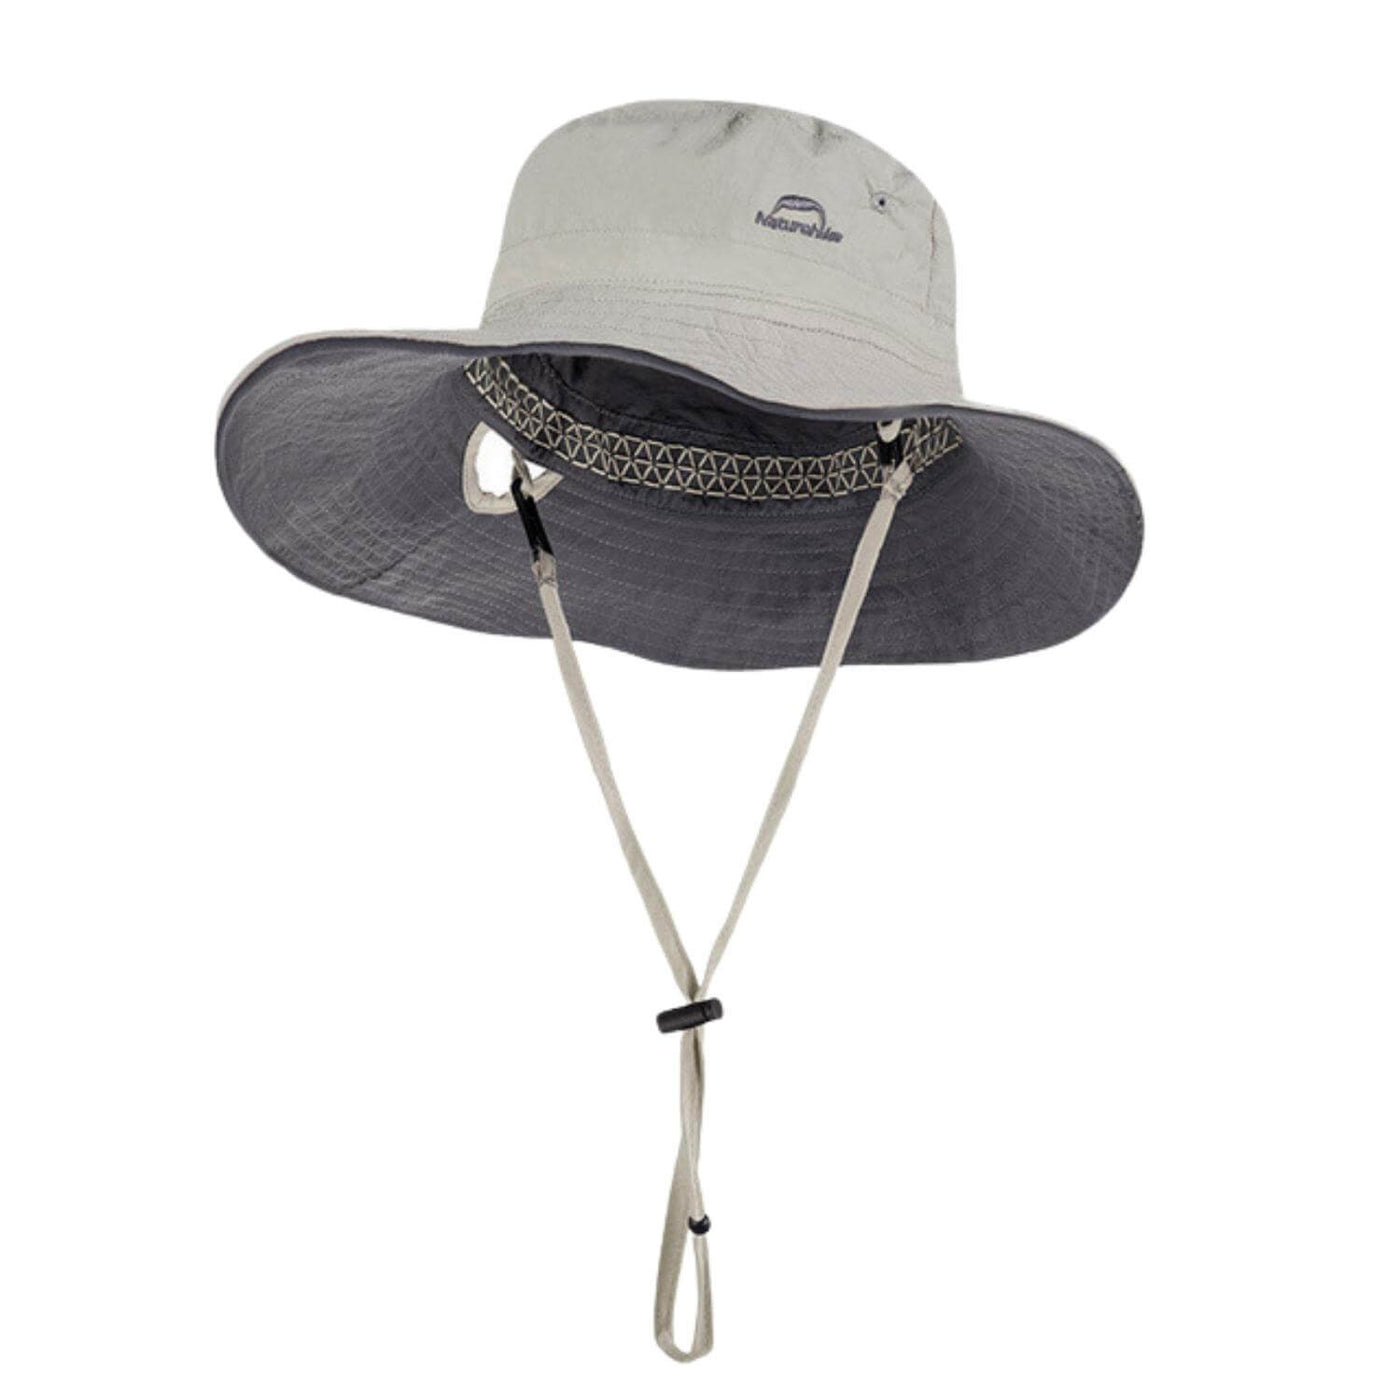 Fisherman hat with UV protection - Unisex